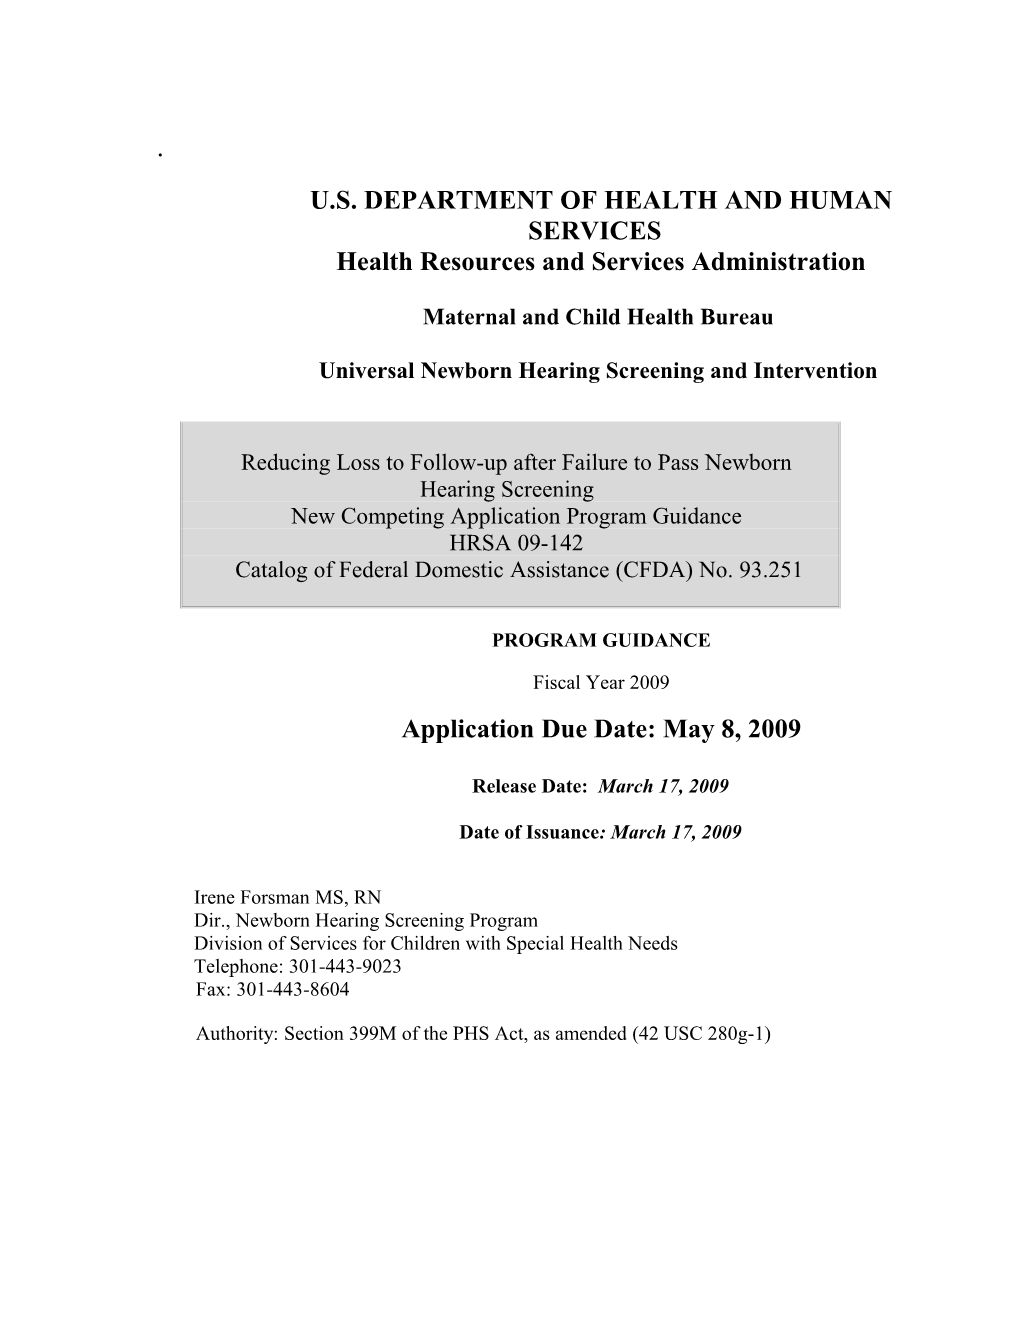 U.S. Department of Health and Human Services s12